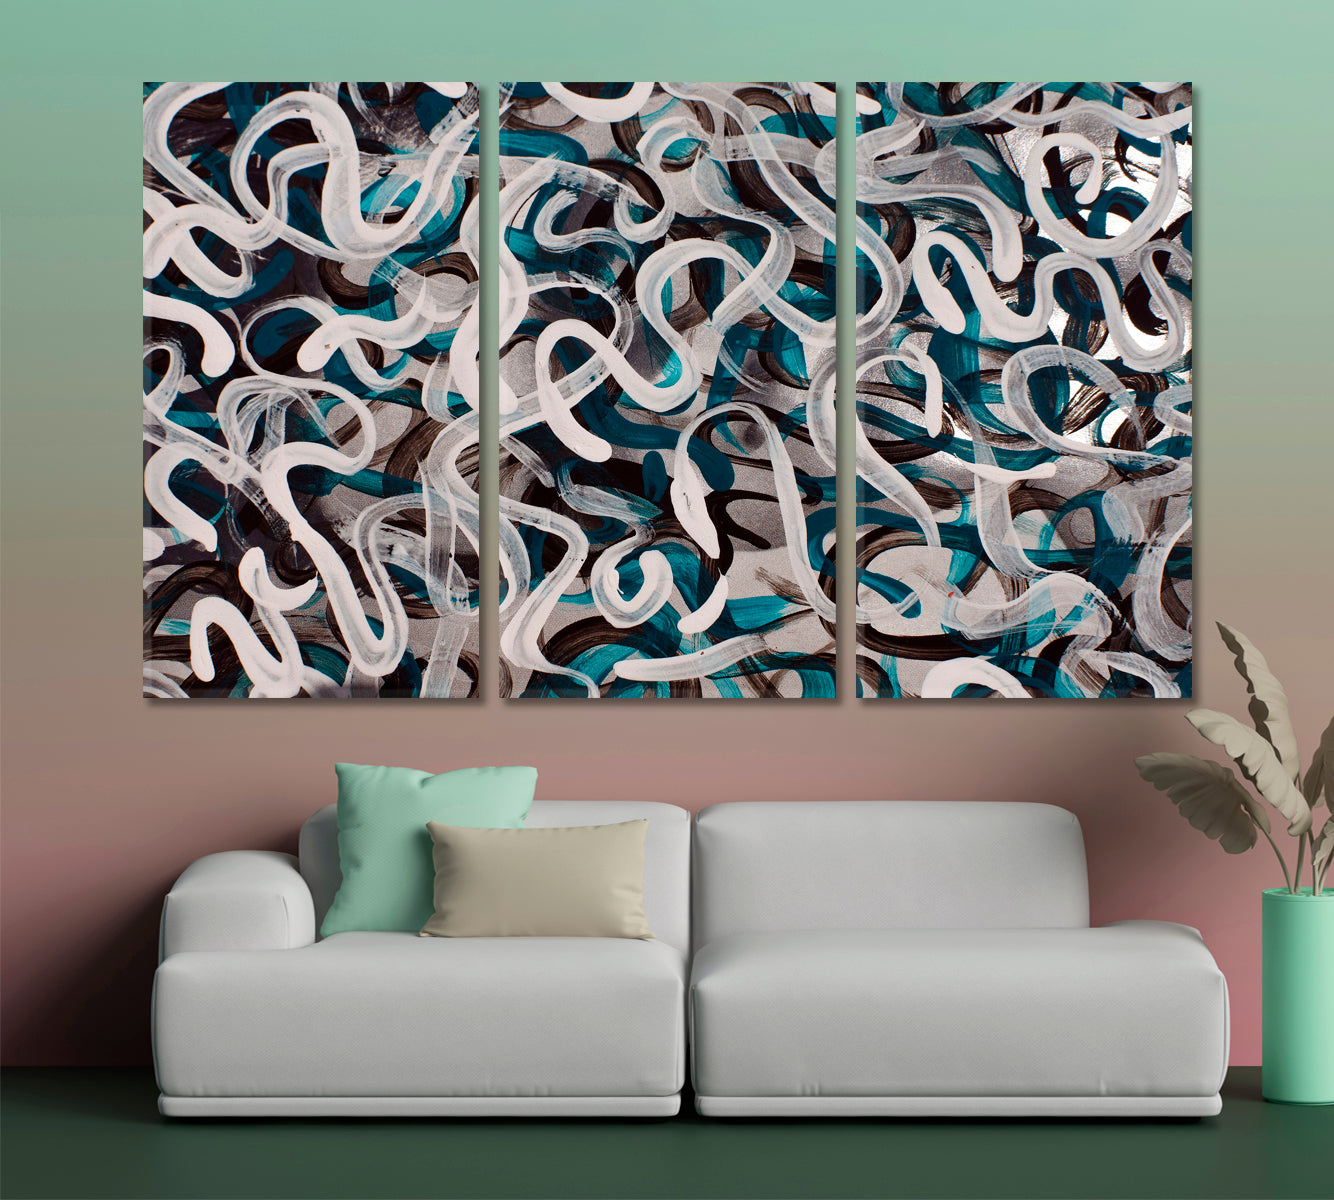 Pollock Style Vibe Cold Colors Etude Modern Abstract Expressionism Wavy Lines Abstract Art Print Artesty 3 panels 36" x 24" 